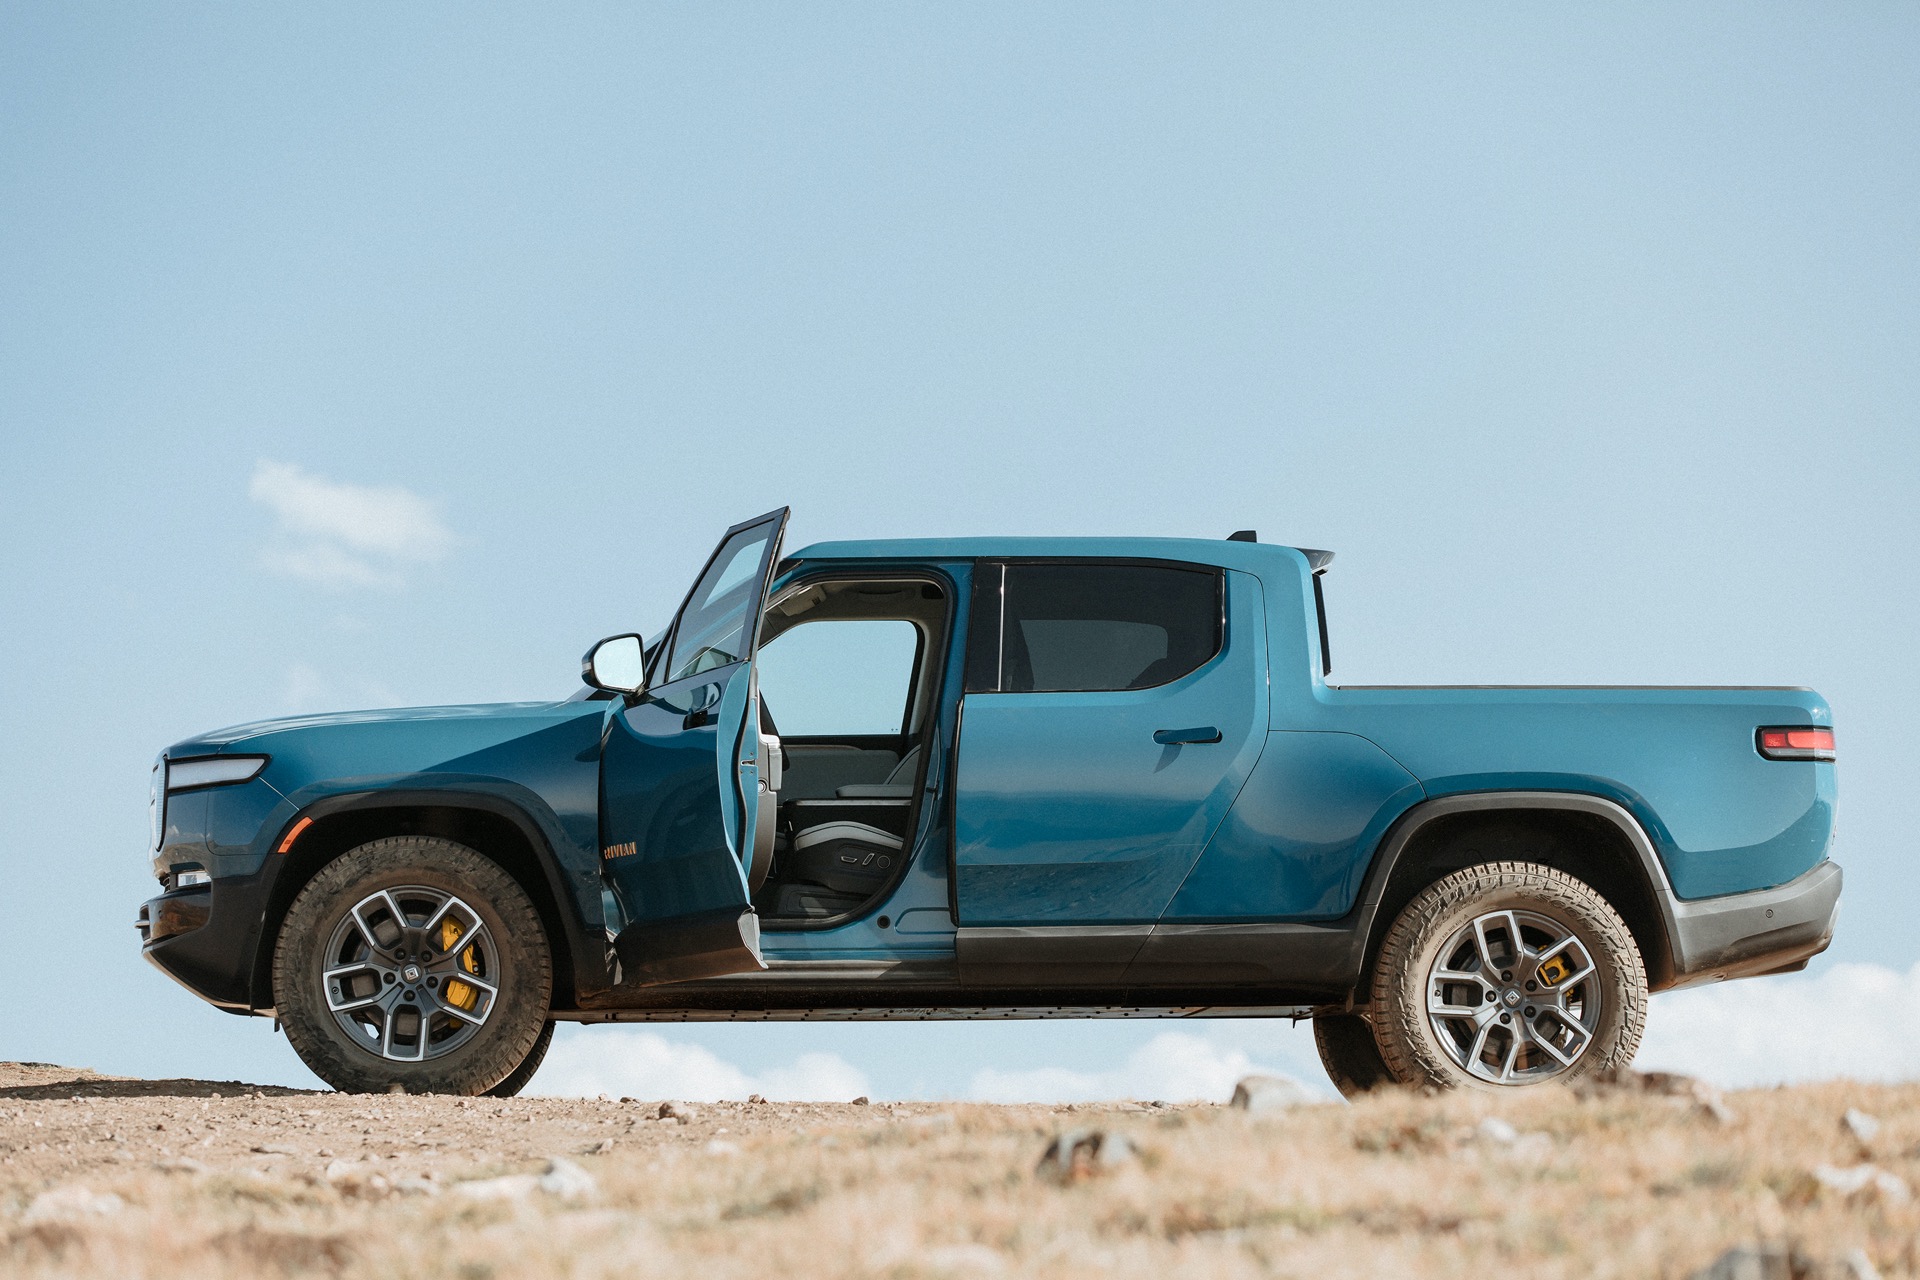 Options for Pre-ordering Trucks, Such as Rivian R1T and Hummer EV Pickup